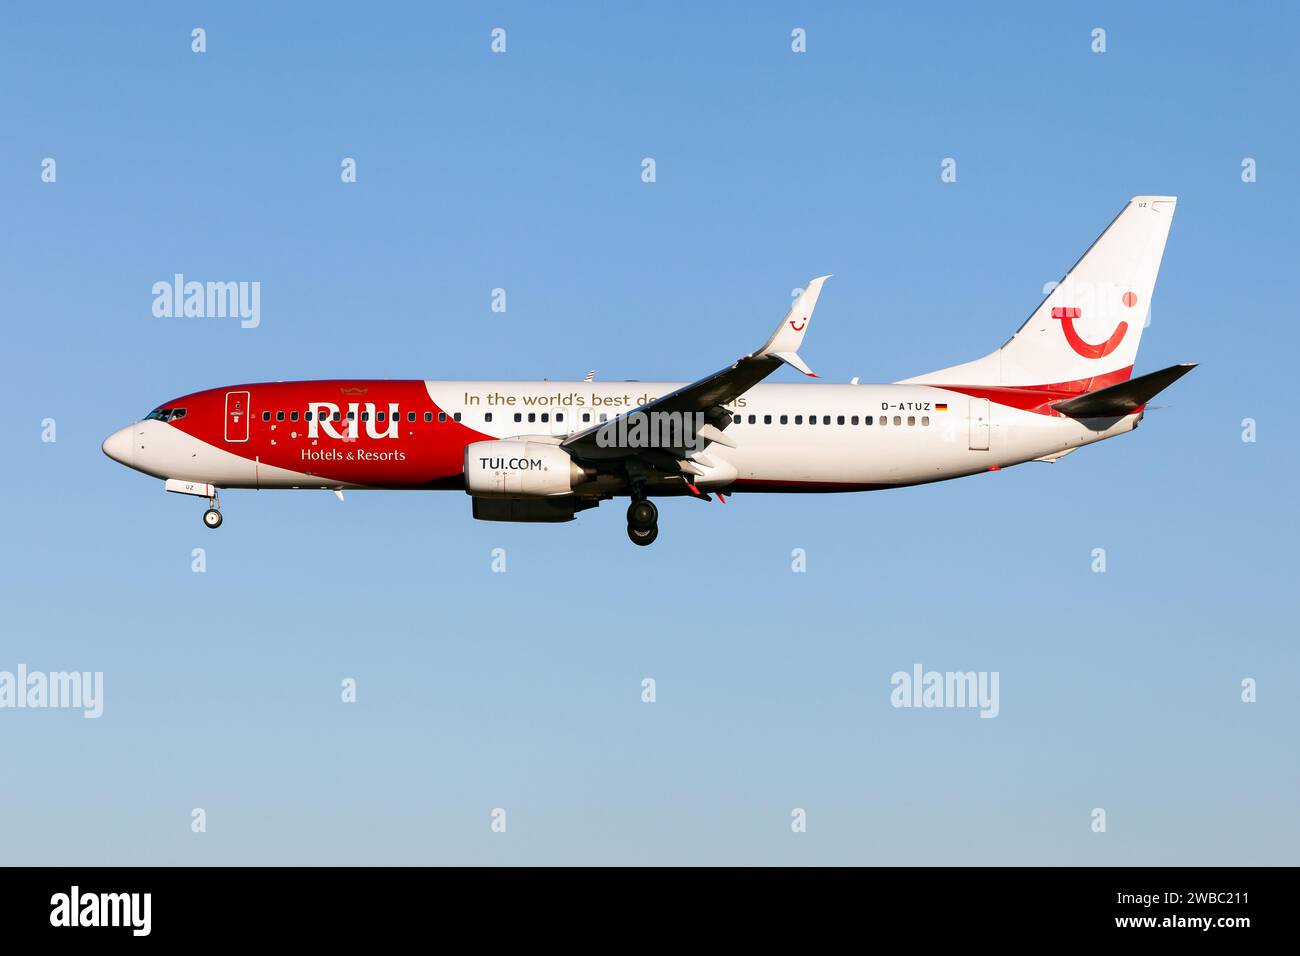 A TUI Boeing 737-800 sponsored by RUI, landing at Barcelona El Prat airport. RIU Hotels is a Spanish hotel chain founded in 1953 and owned by TUI until 2021. Now the RIU family is back to the full owner. It has nearly 100 hotels in 20 countries. Stock Photo